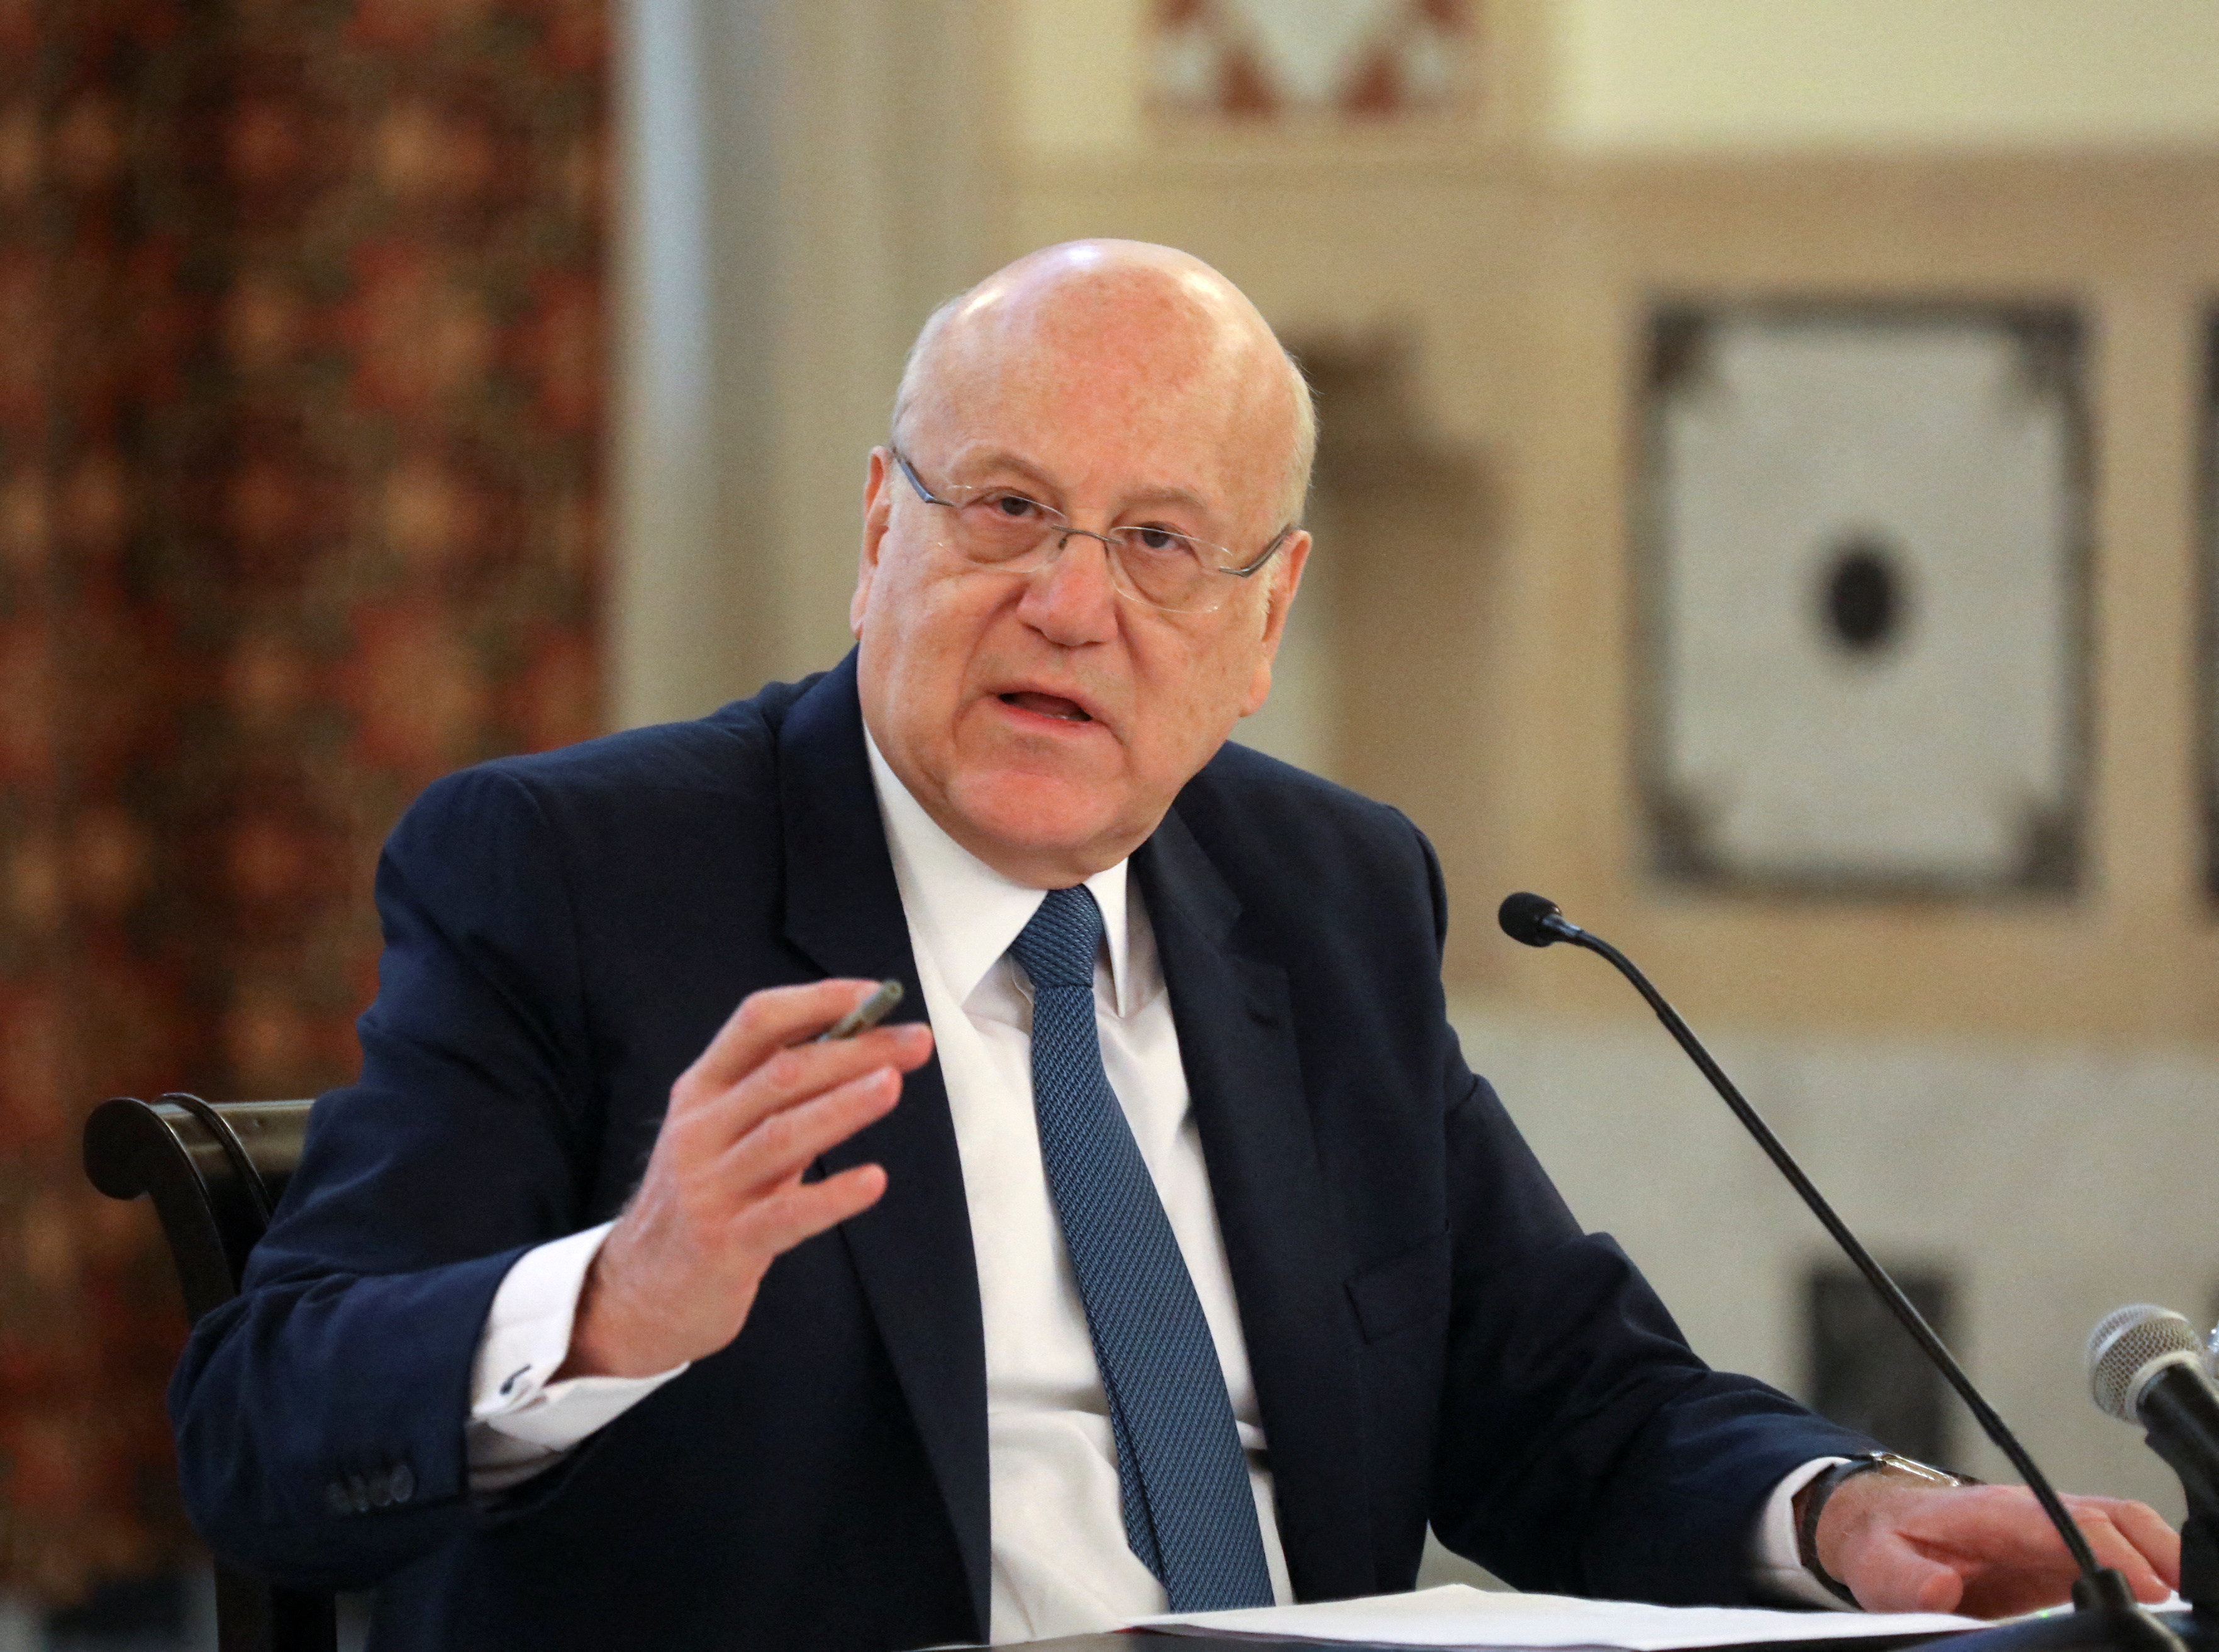 Lebanese Prime Minister Najib Mikati gestures during a news conference on the latest developments in the country, at the governmental palace in Beirut